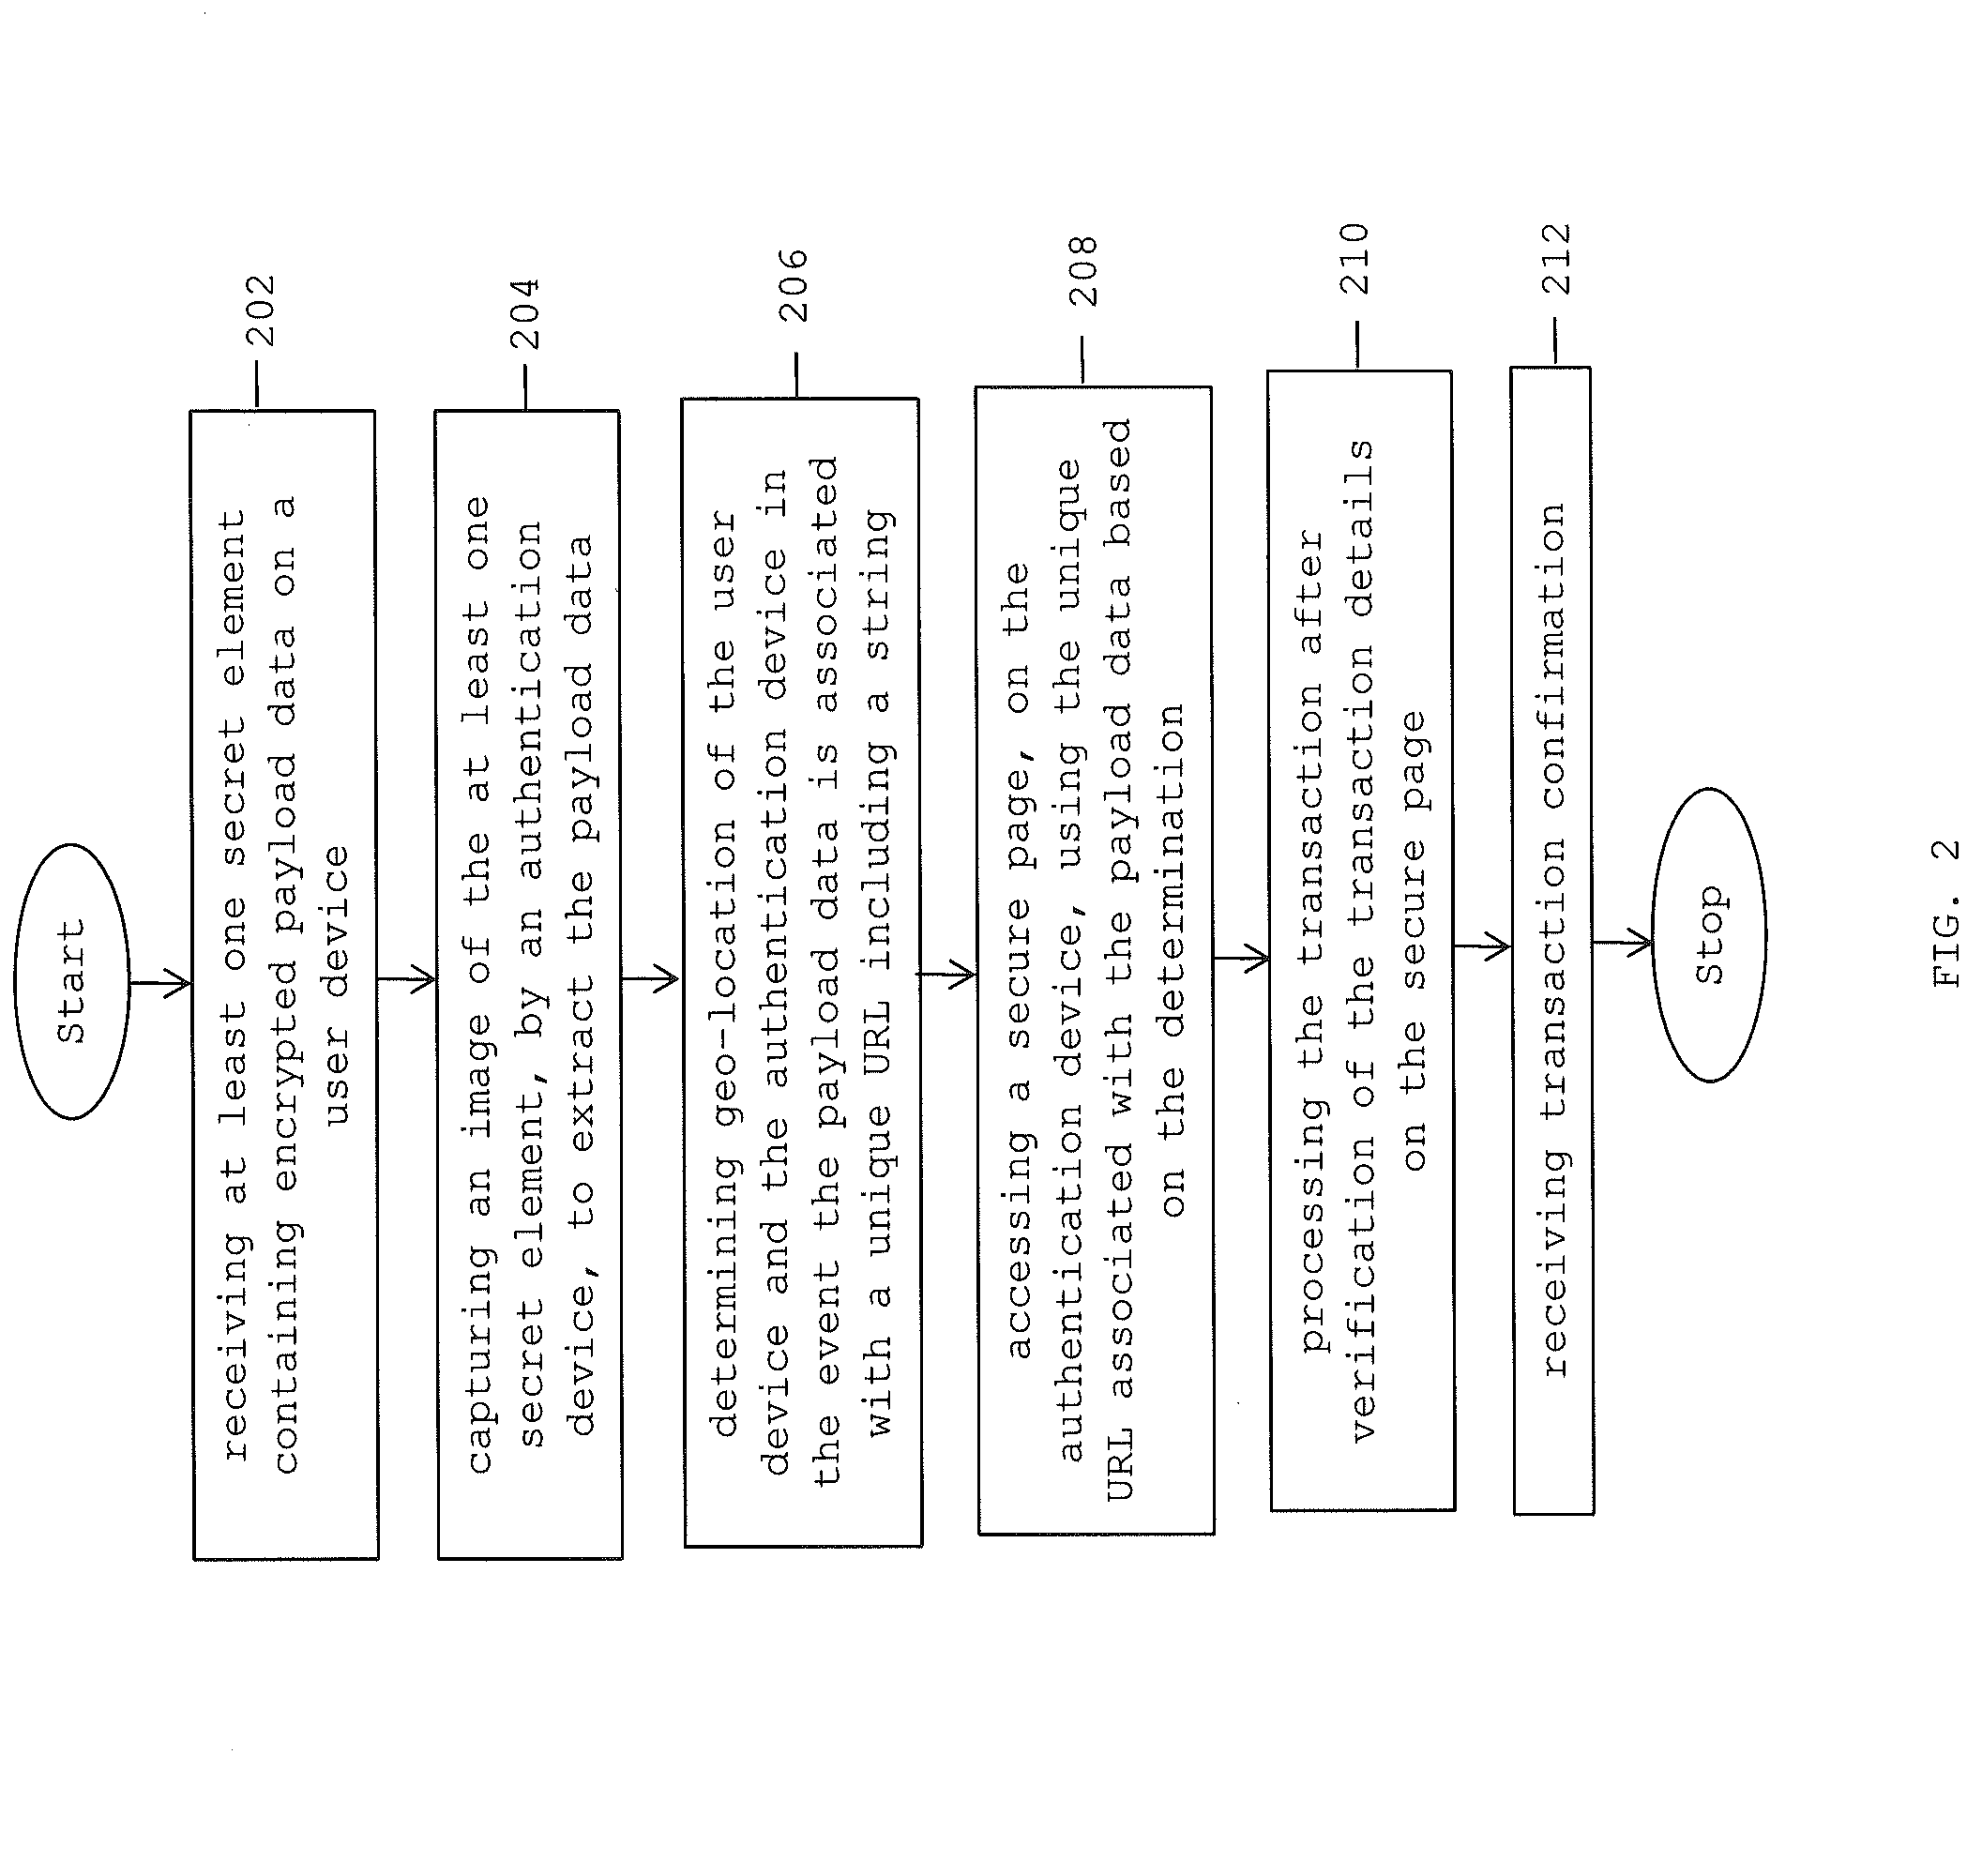 Method and system for providing secure end-to-end authentication and authorization of electronic transactions